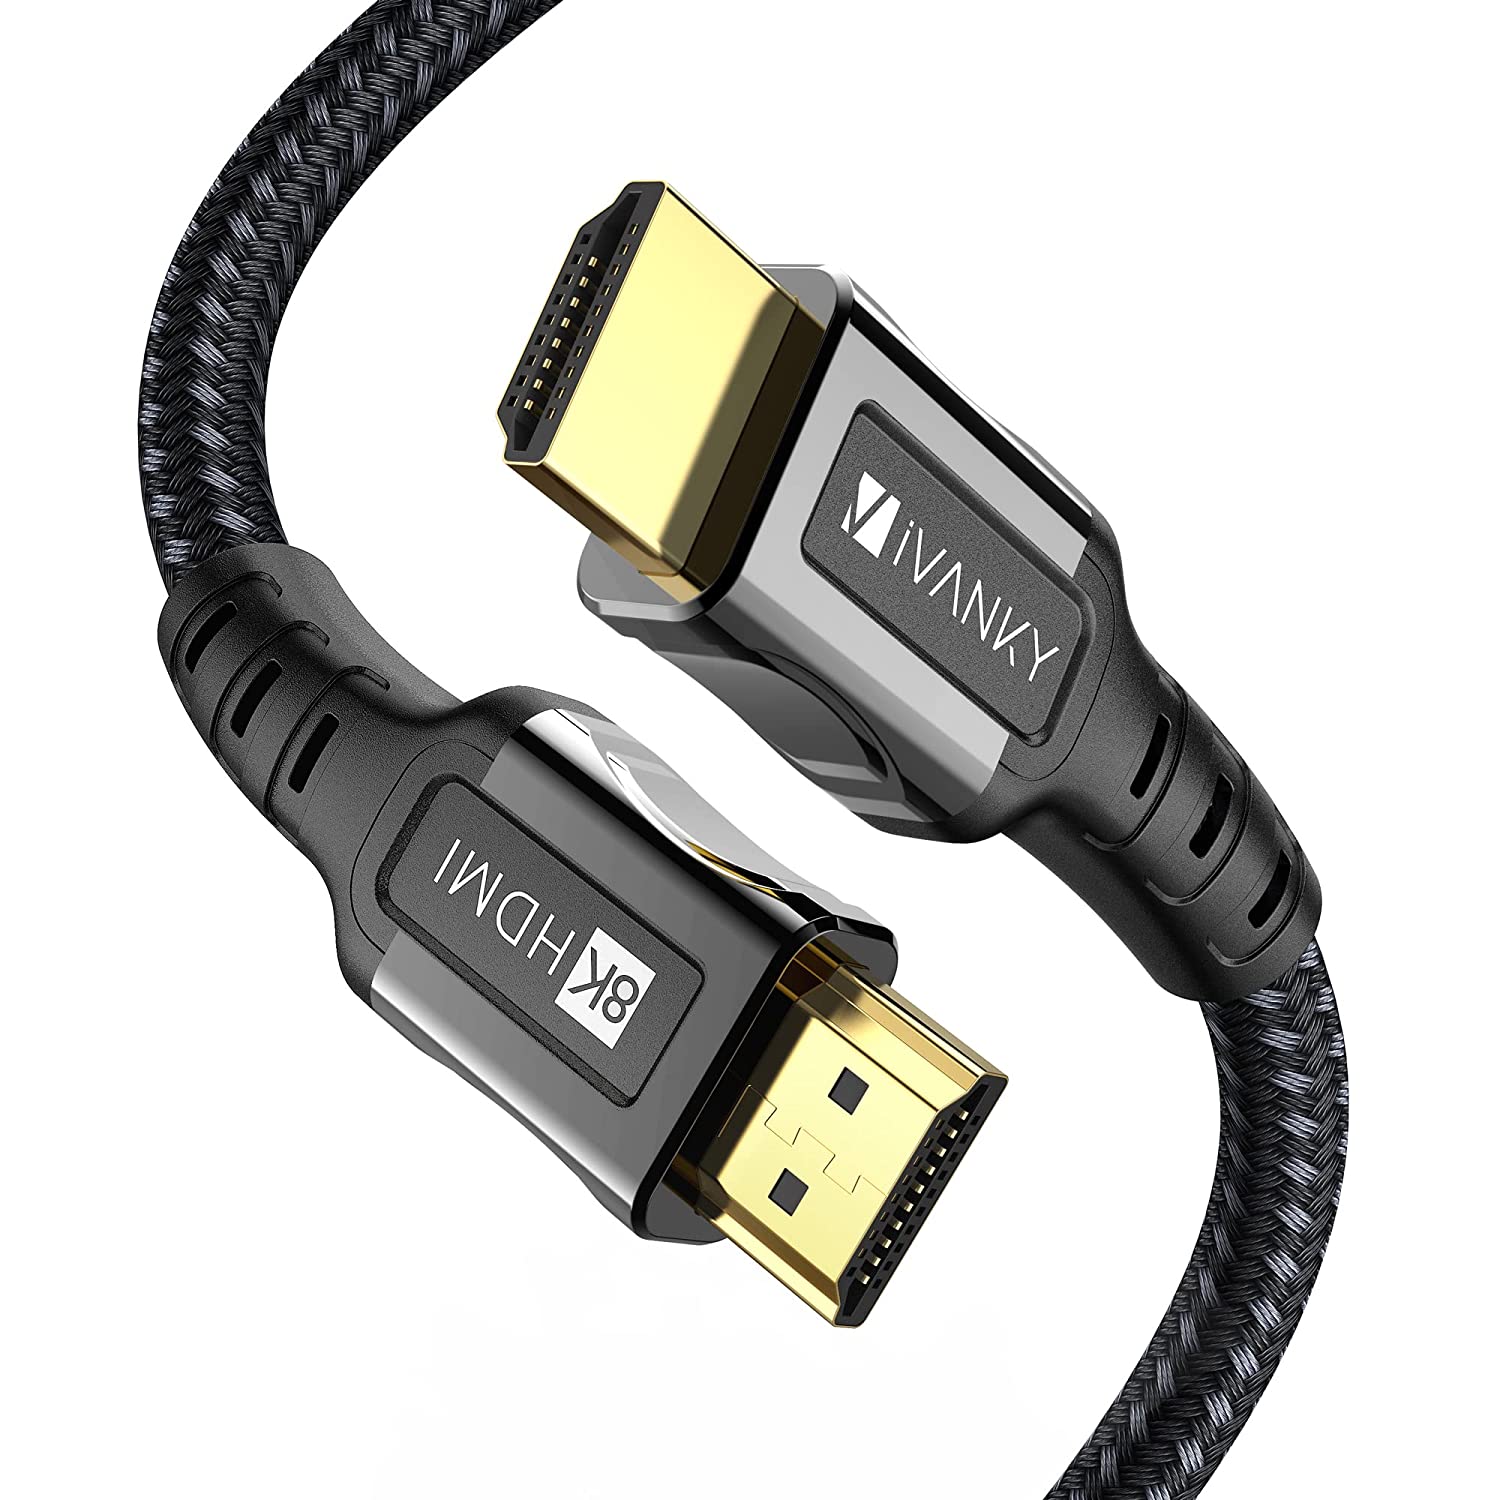  10. iVANKY 8K HDMI Cable 3.3 ft 